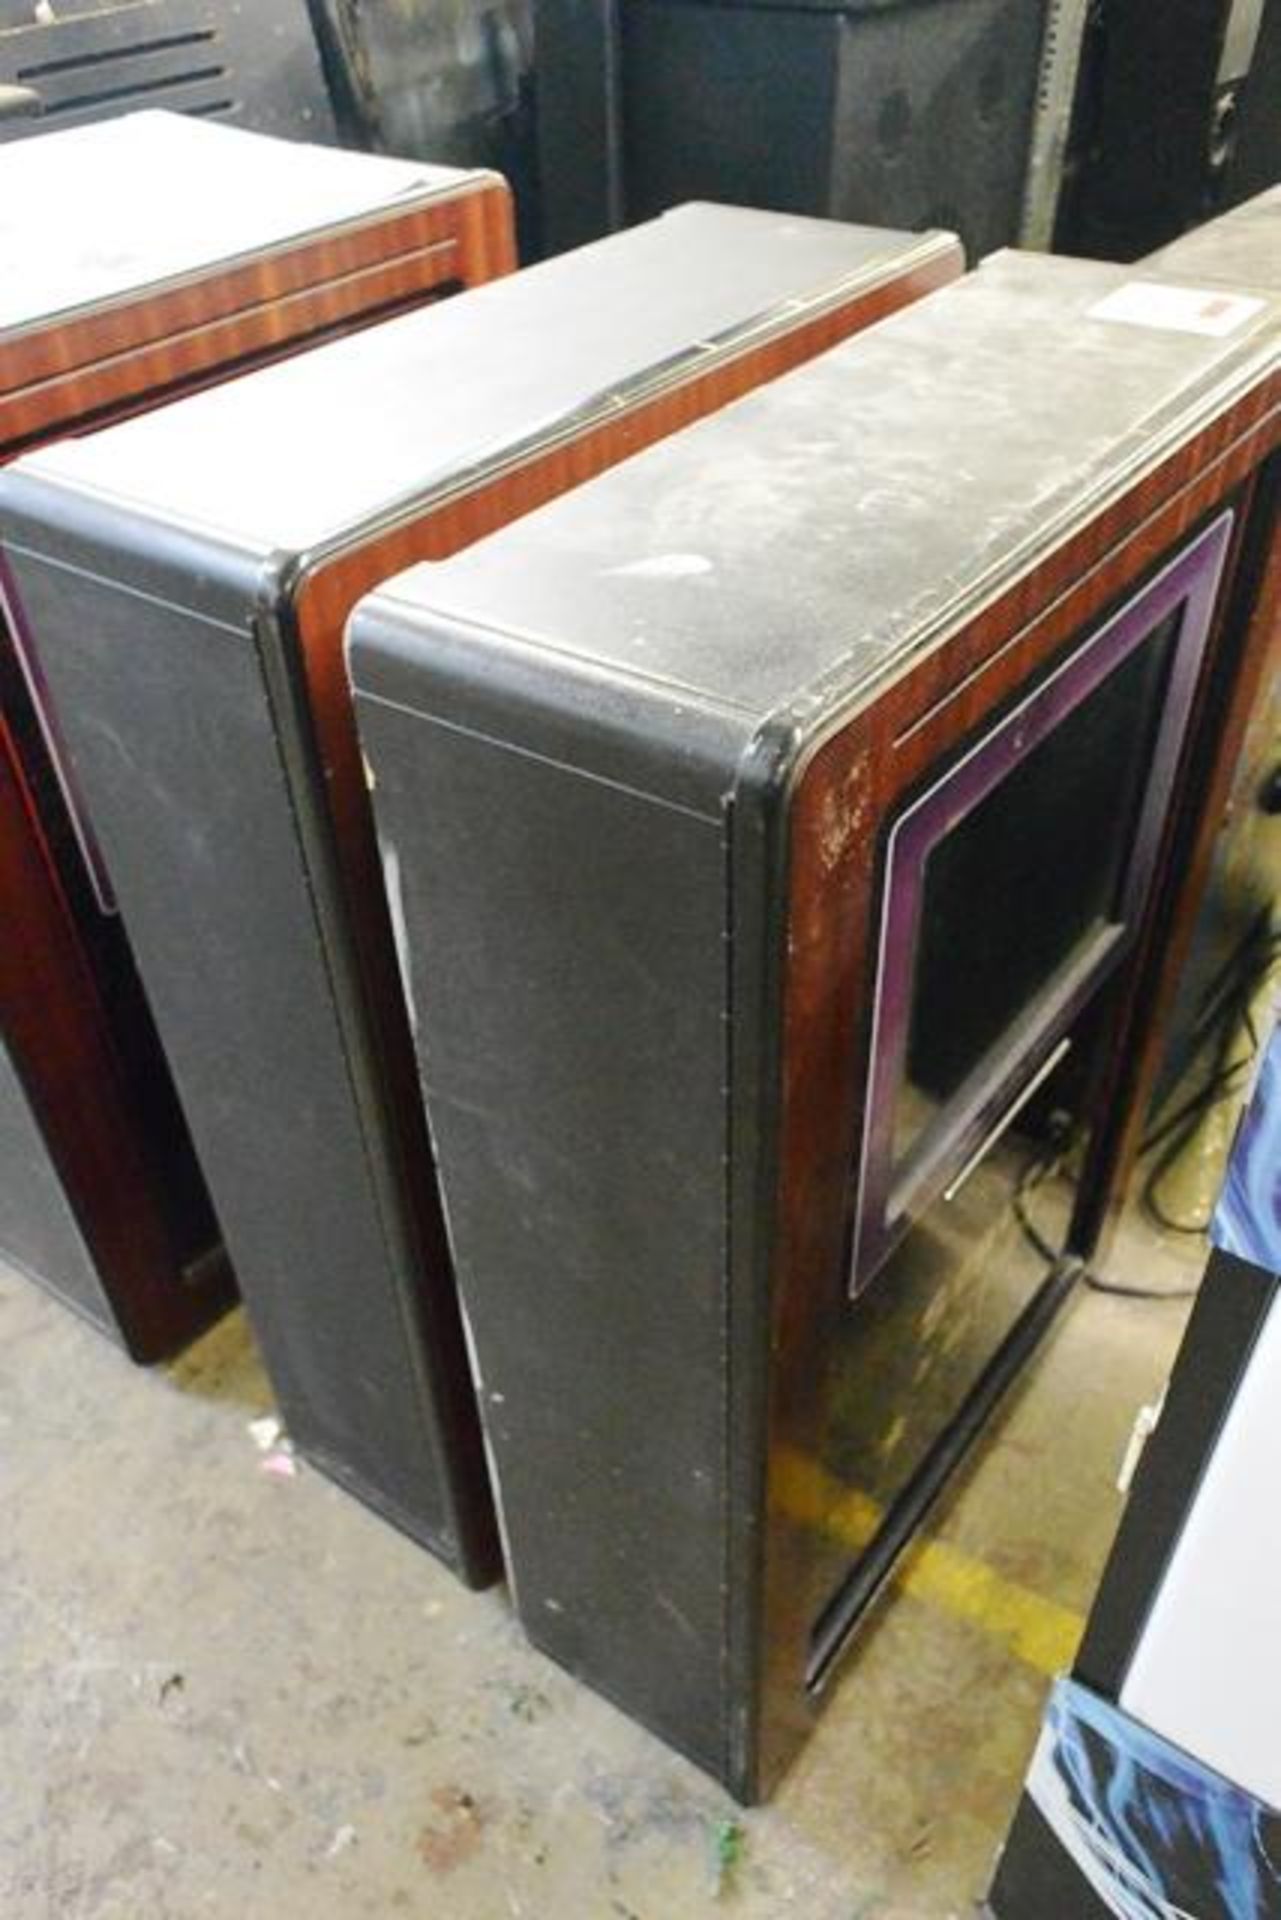 Two Sound Leisure 'Super Stars' digital jukeboxes (hardware only) (please note: working condition